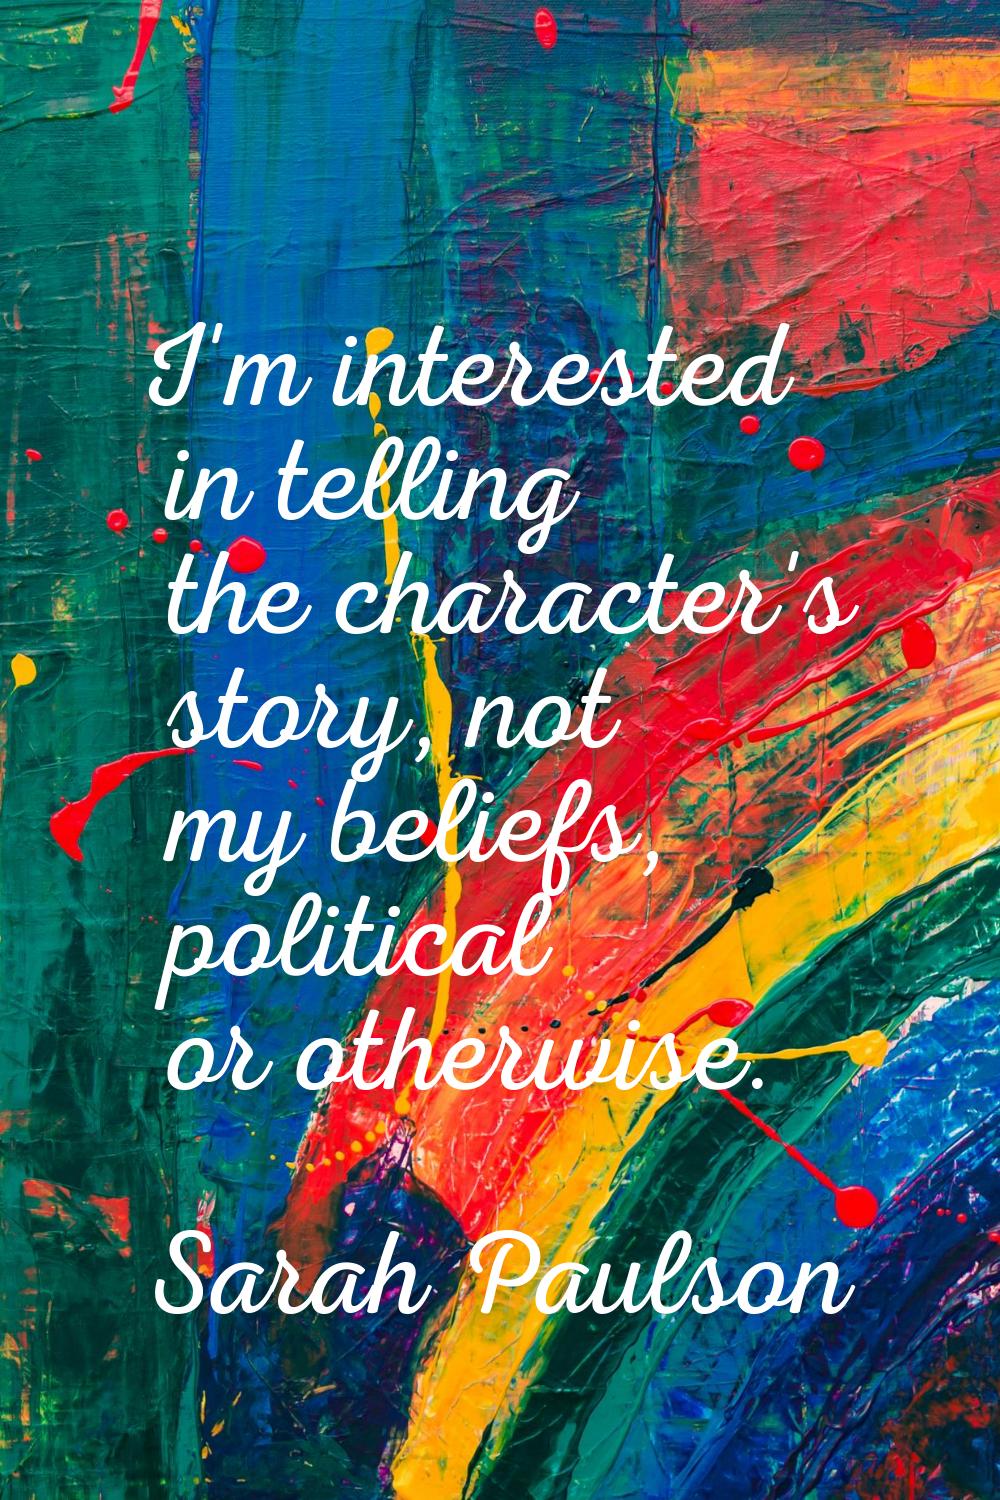 I'm interested in telling the character's story, not my beliefs, political or otherwise.